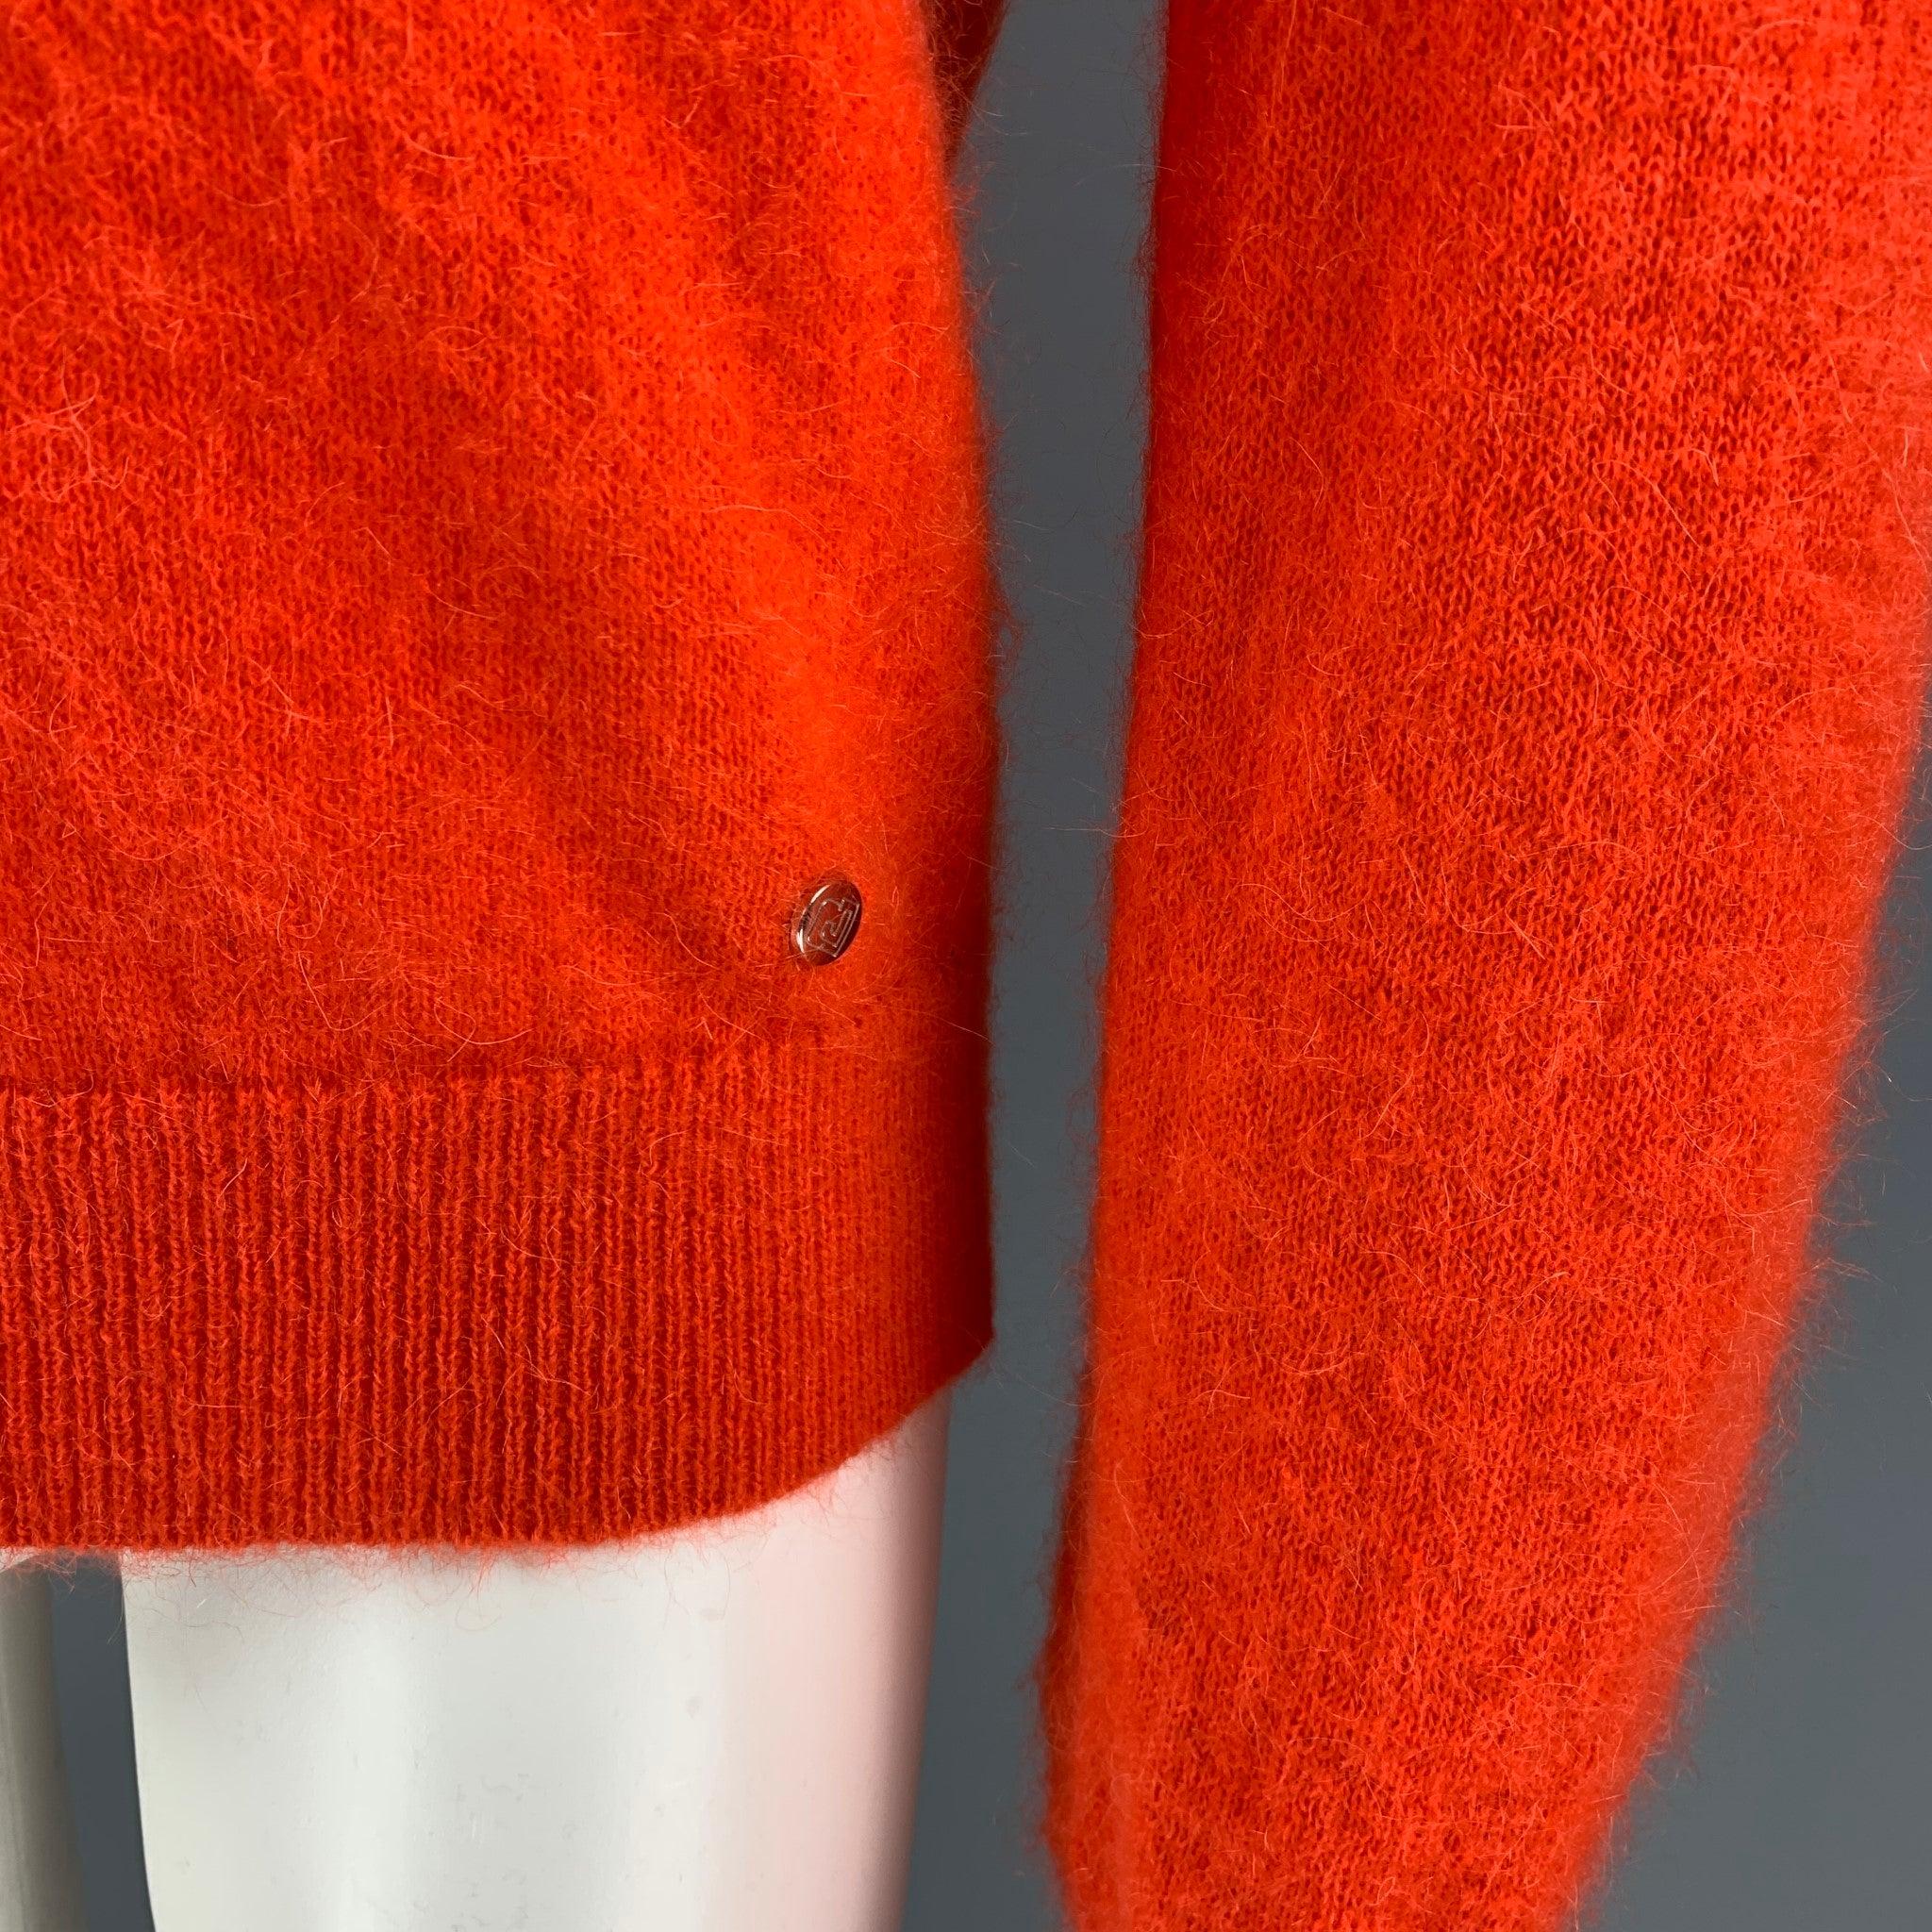 PACO RABANNE sweater comes in a orange mohair blend featuring a turtleneck design.
Excellent
Pre-Owned Condition. 

Marked:   M  

Measurements: 
 
Shoulder: 16 inches Chest:
40 inches Sleeve: 30 inches Length: 25.5 inches 
  
  
 
Reference: